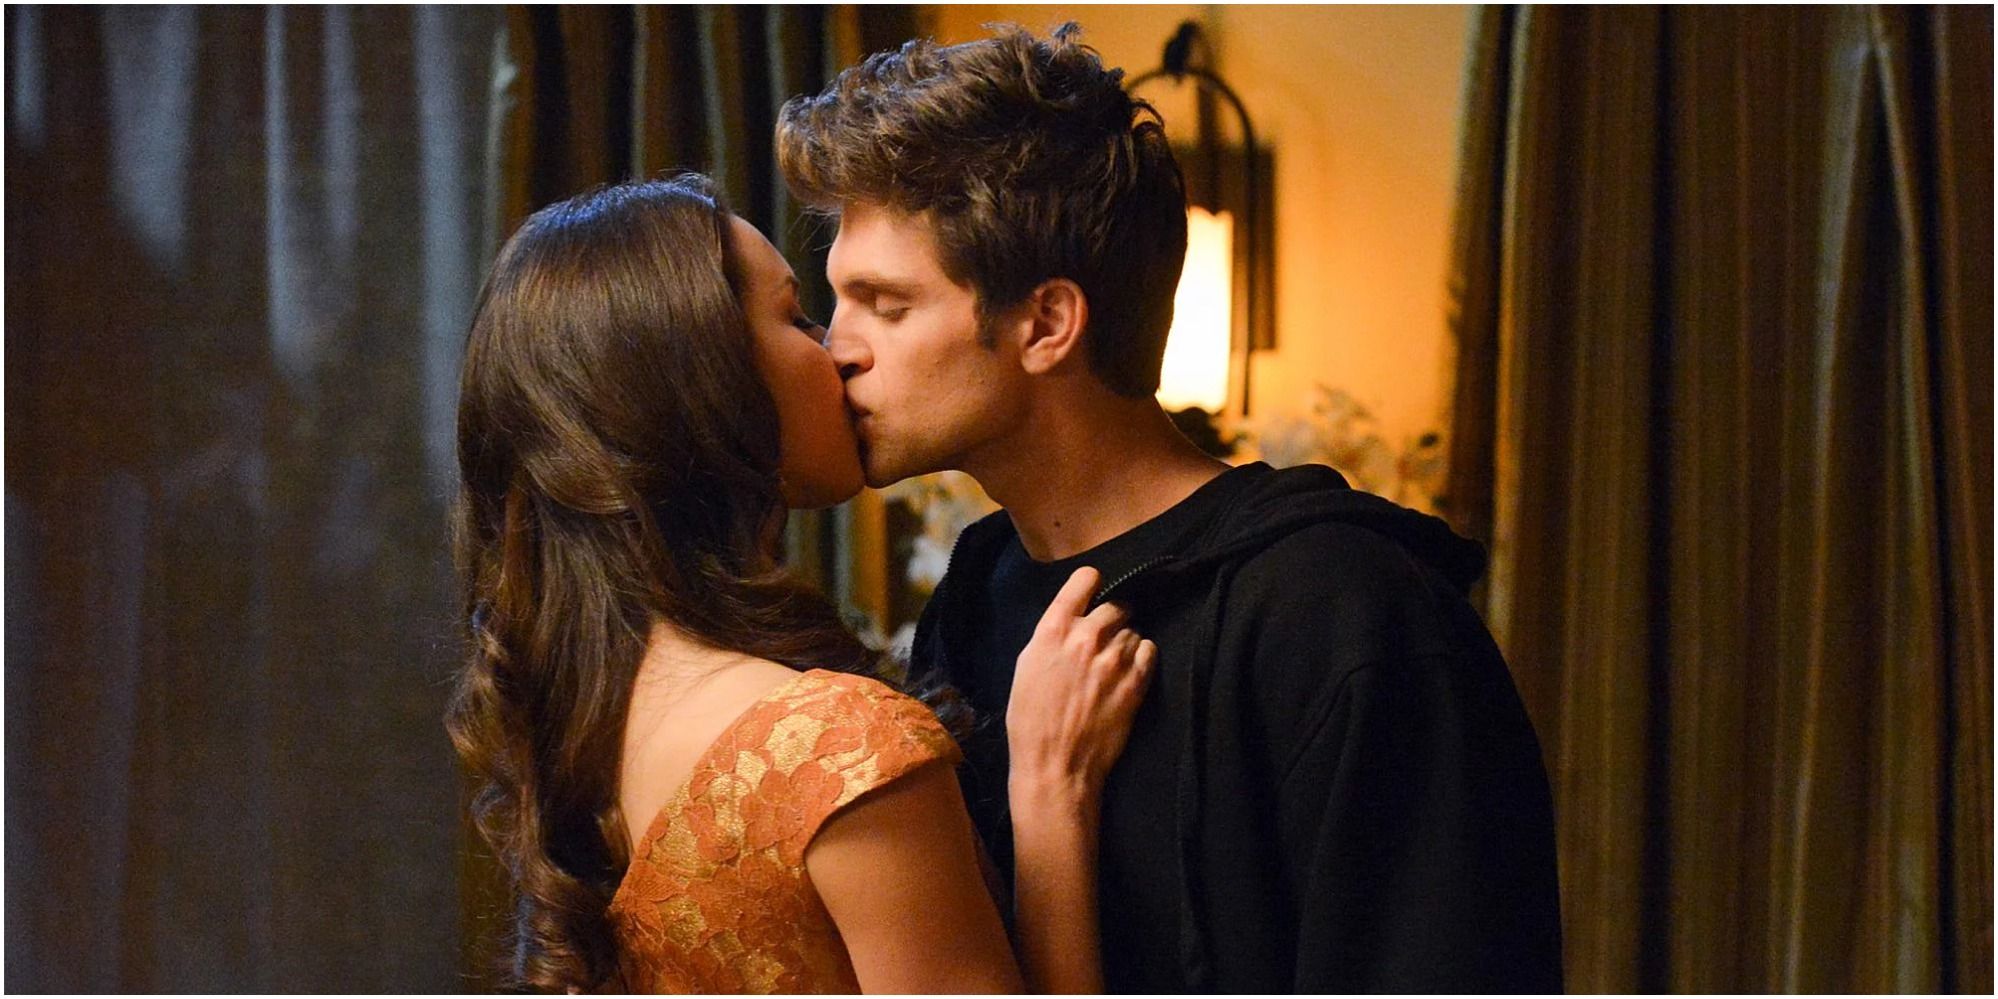 Pretty Little Liars 10 Major Relationships Ranked From Least To Most Successful